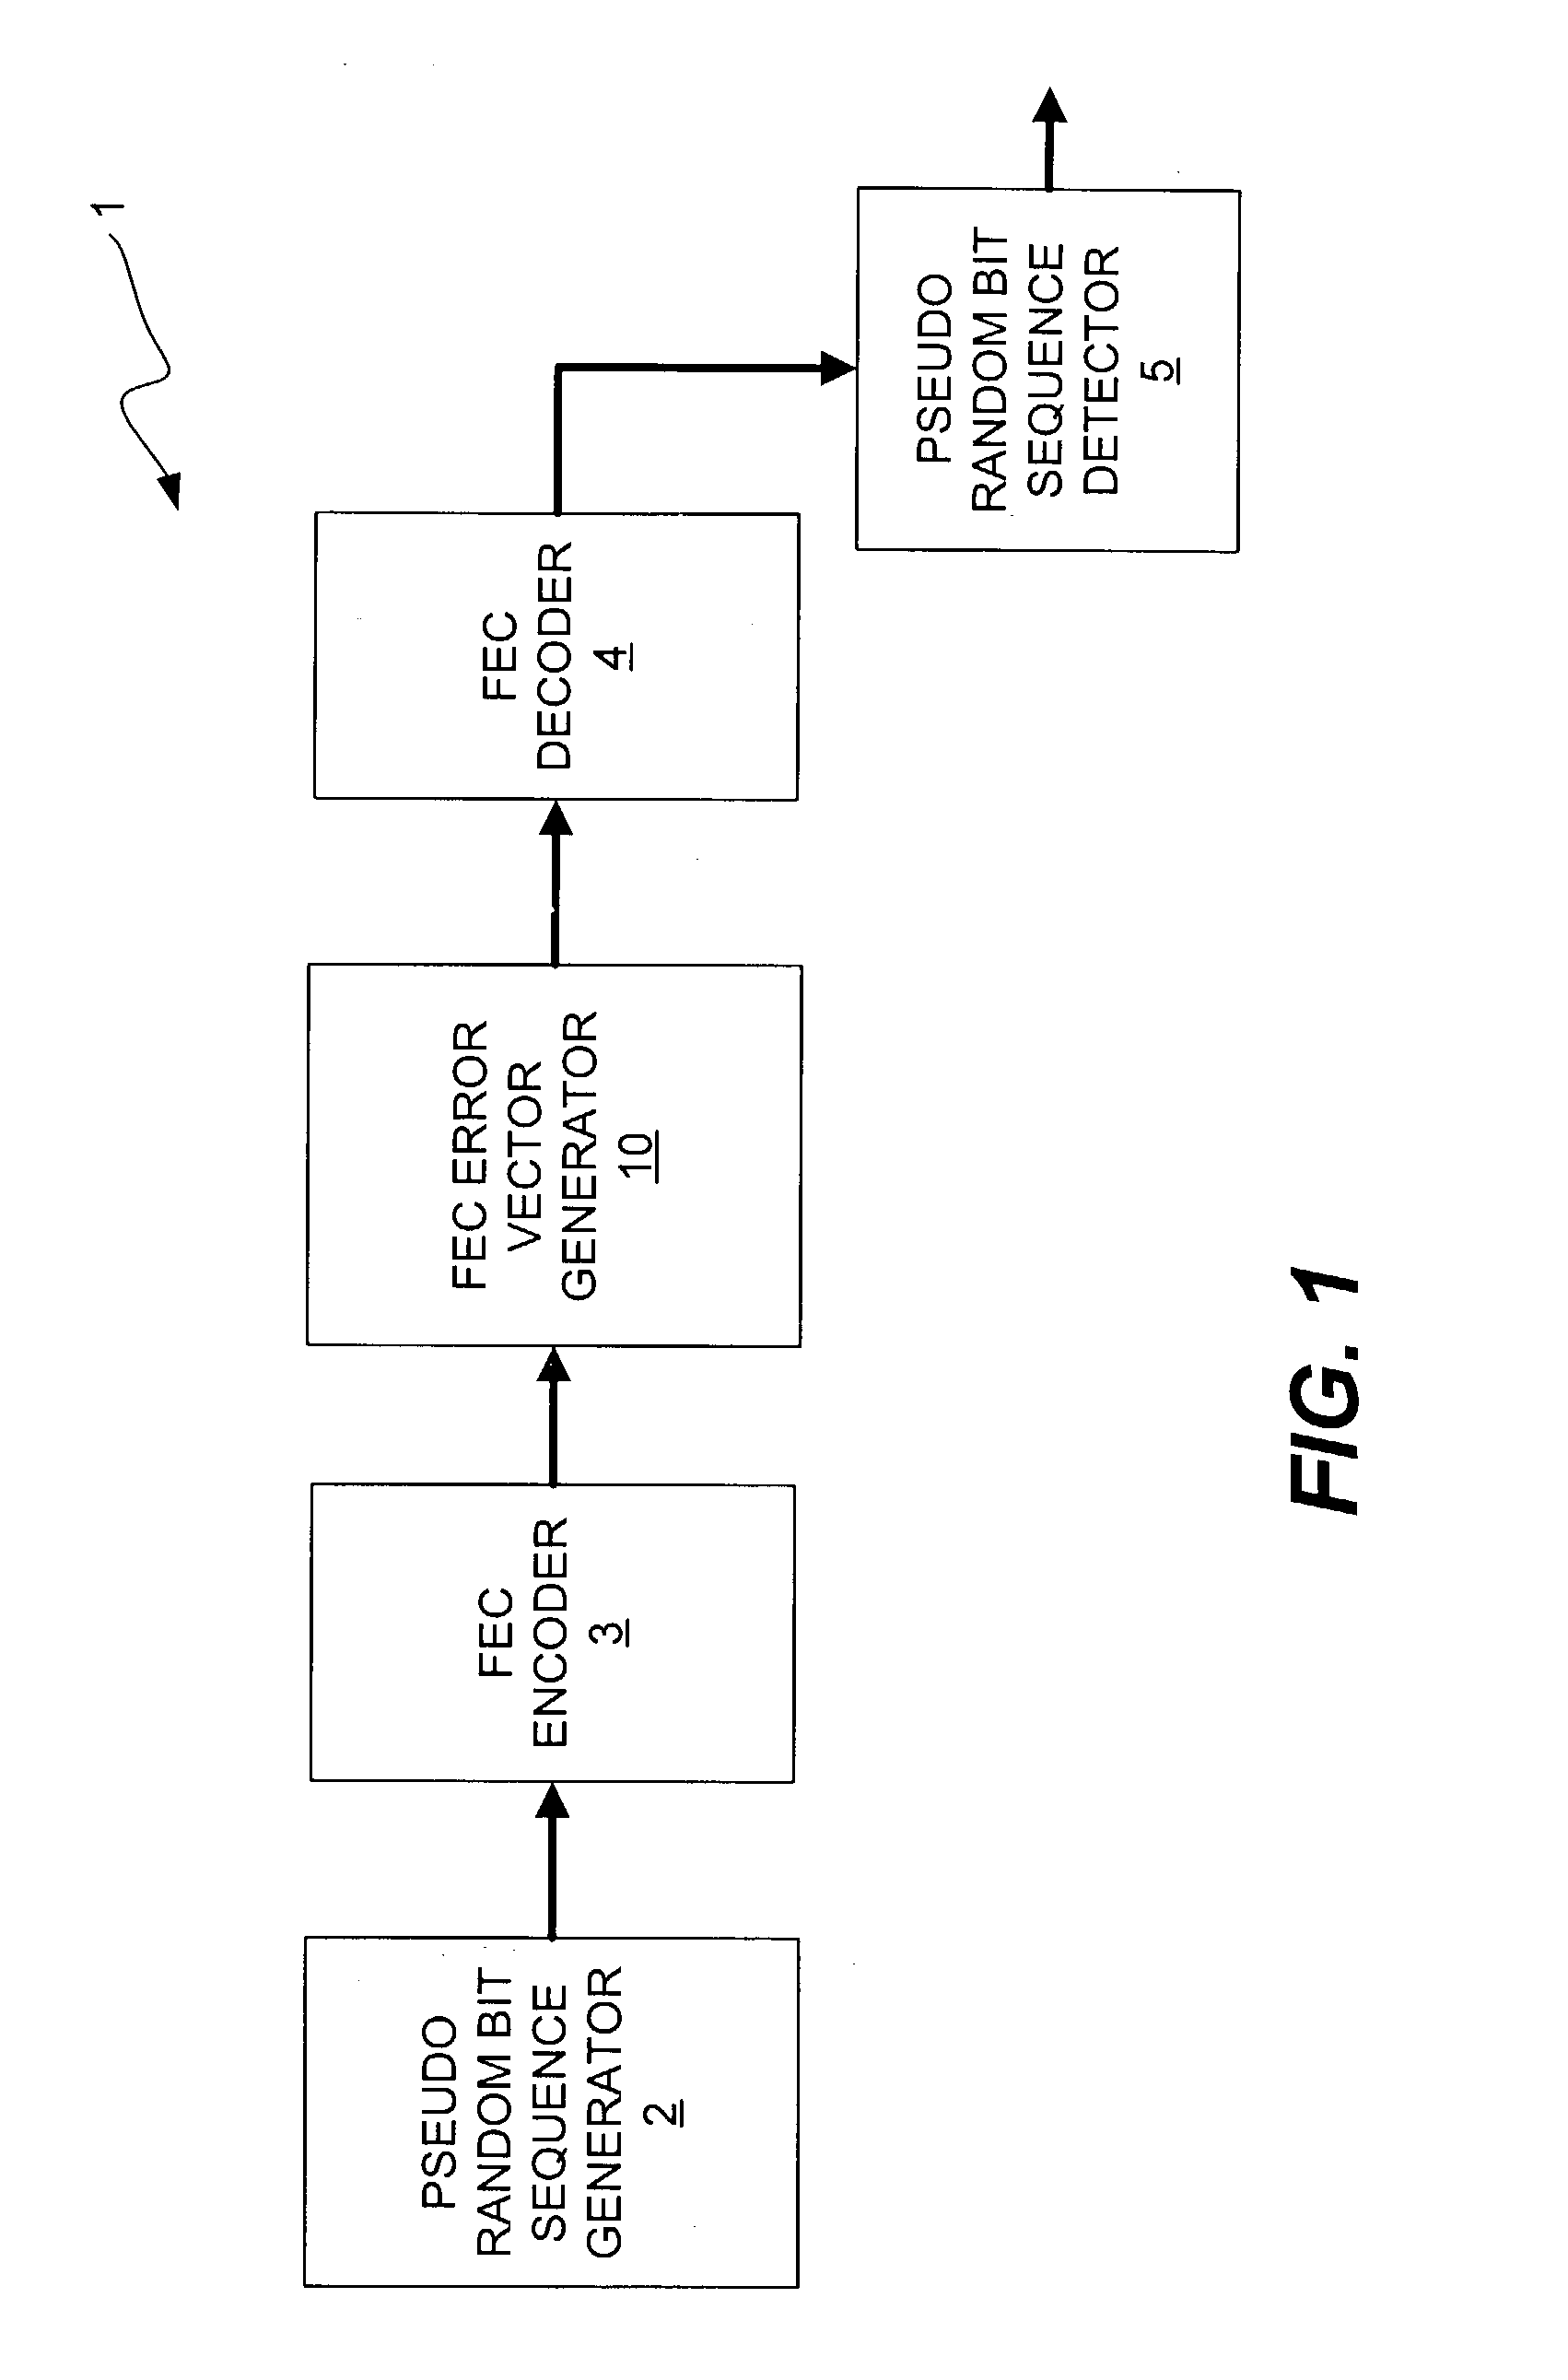 Method and apparatus for generating bit errors in a forward error correction (FEC) system to estimate power dissipation characteristics of the system